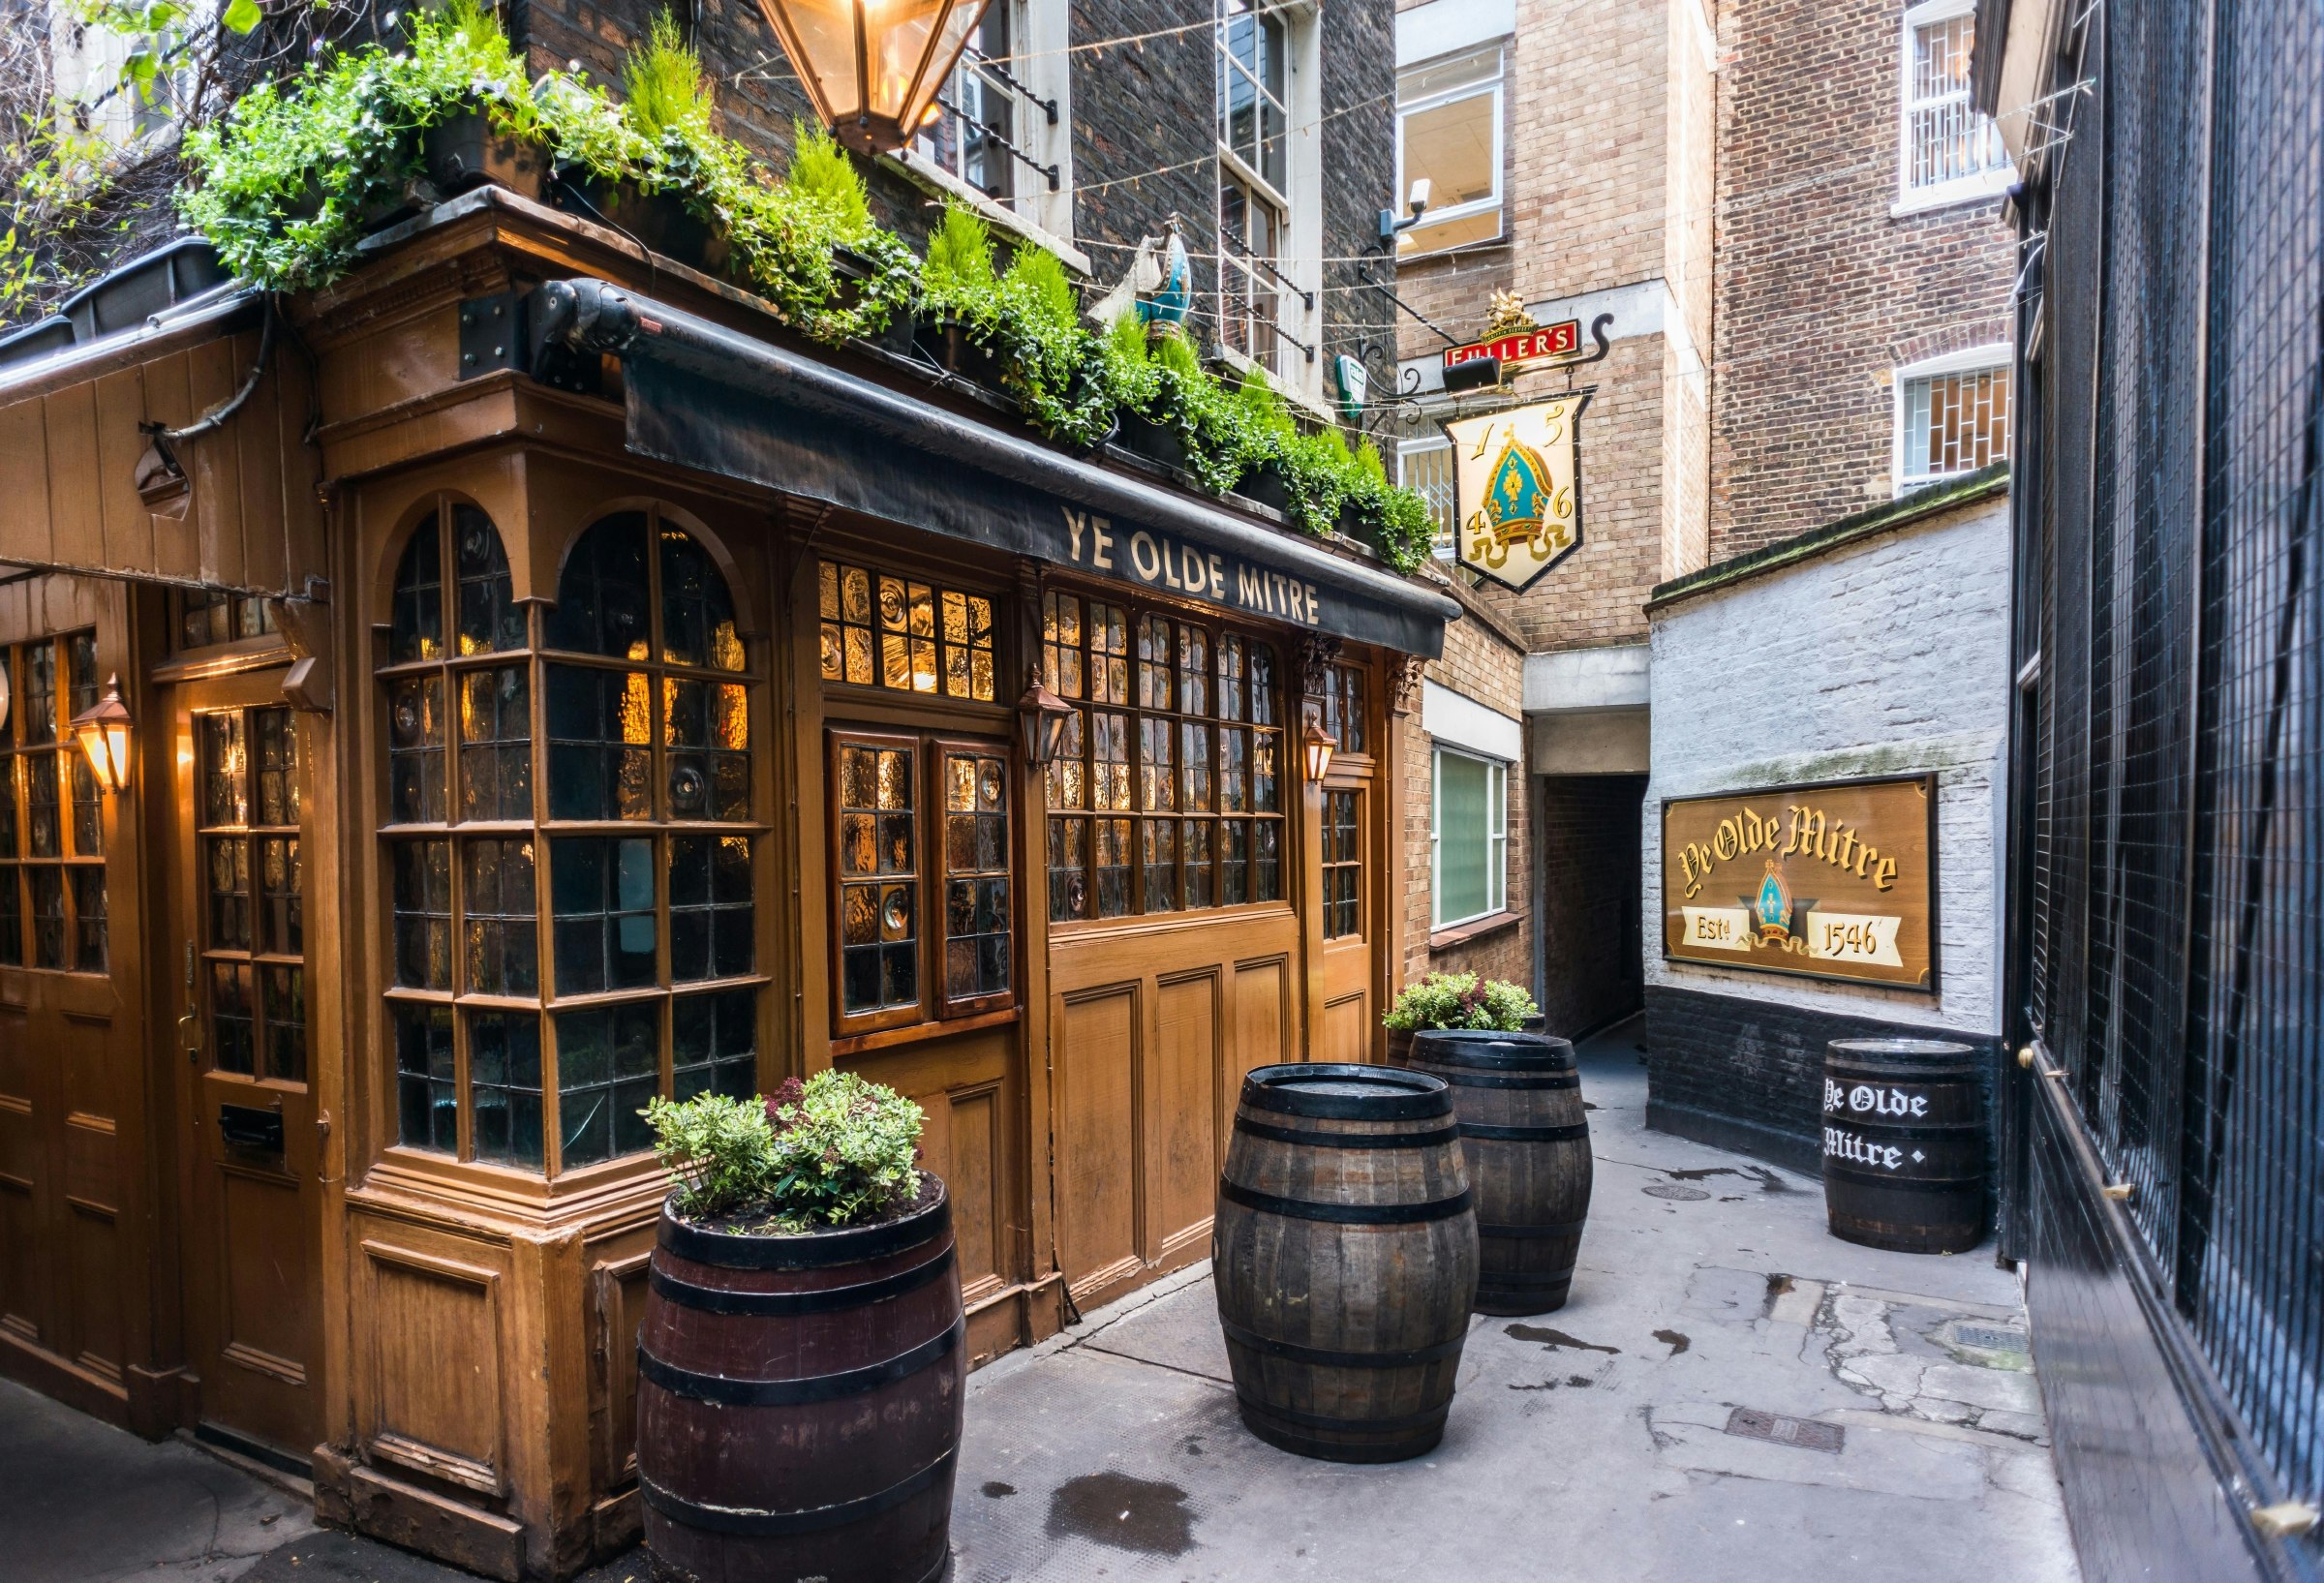 The wooden-fronted Ye Olde Mitre pub exterior with oak barrels outside as tables and green plants running above the awning